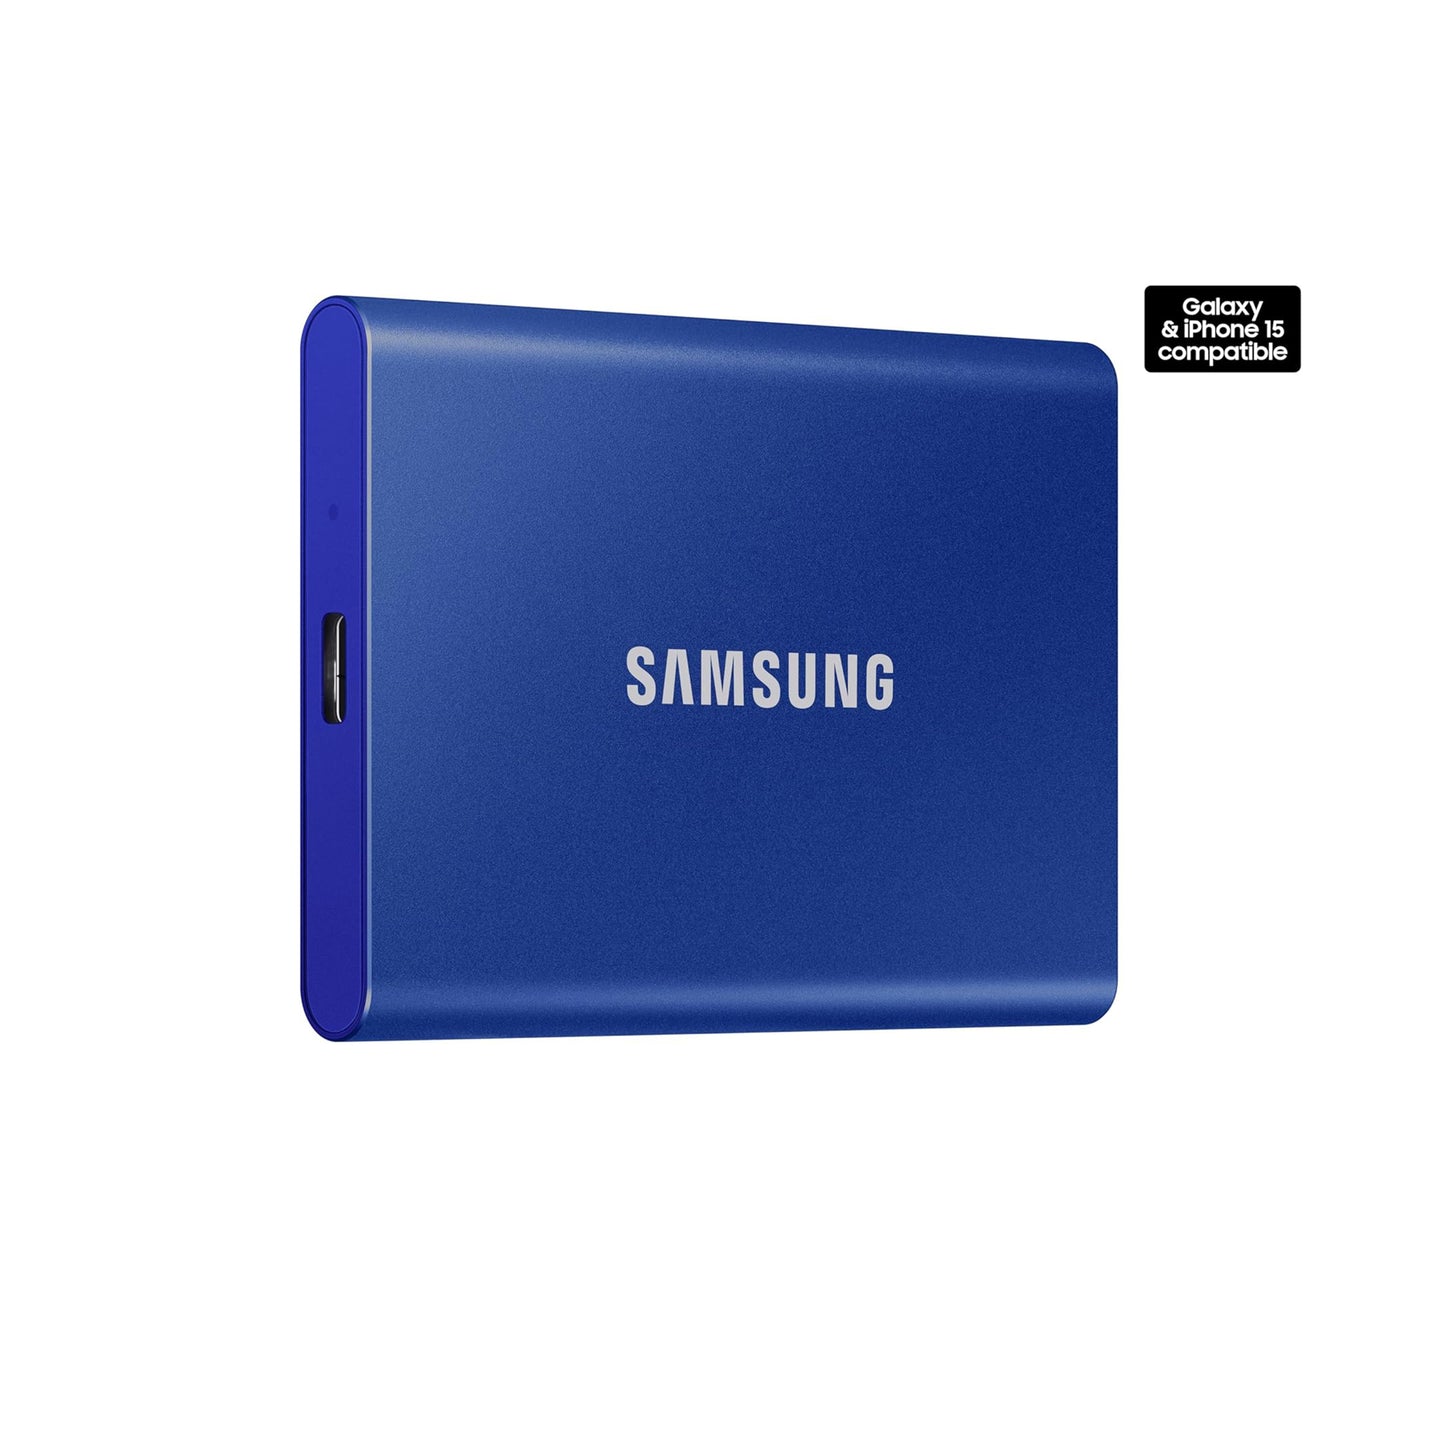 SAMSUNG SSD T7 Portable External Solid State Drive 2TB, USB 3.2 Gen 2, Reliable Storage for Gaming, Students, Professionals, MU-PC2T0H/AM, Blue